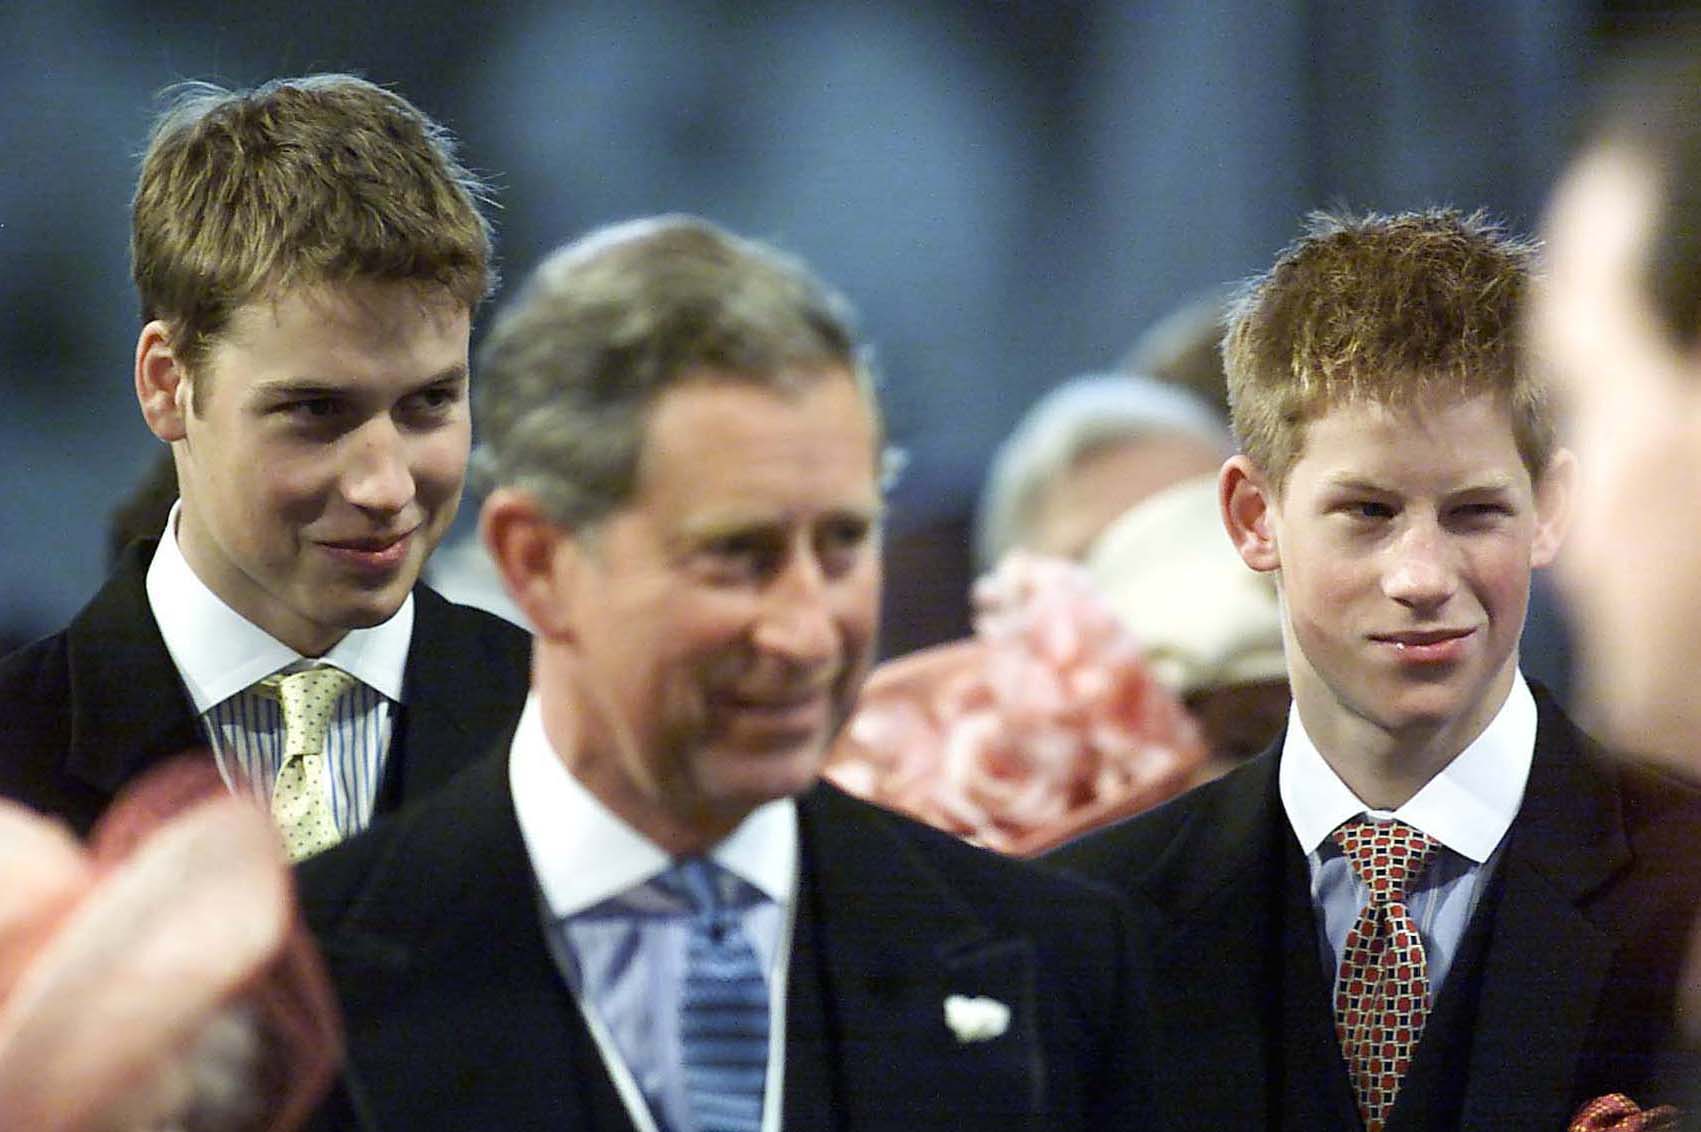 Prince Charles with sons Prince William and Prince Harry at National Service of Thanksgiving for Queen Mother's 100th birthday at St. Paul's Cathedral. / Source: Getty Images